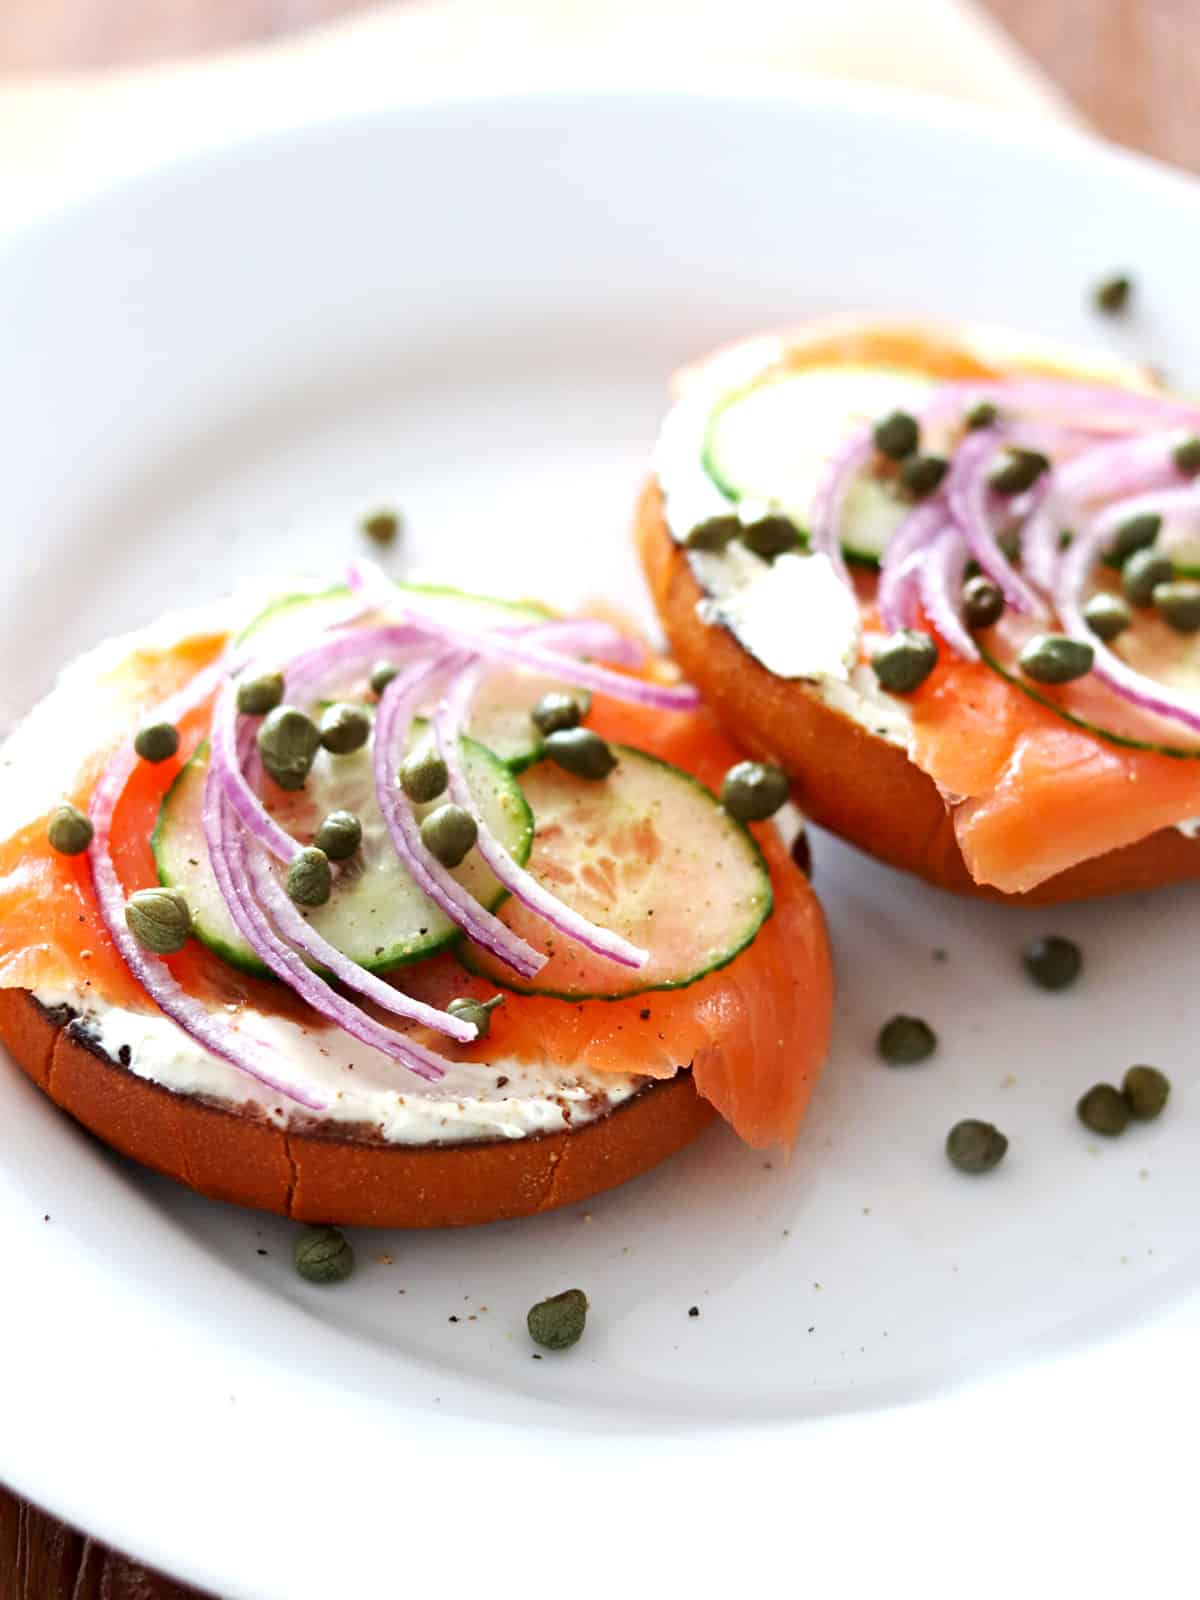 Open-faced lox and bagel sandwich topped with sliced red onion, cucumber and capers.